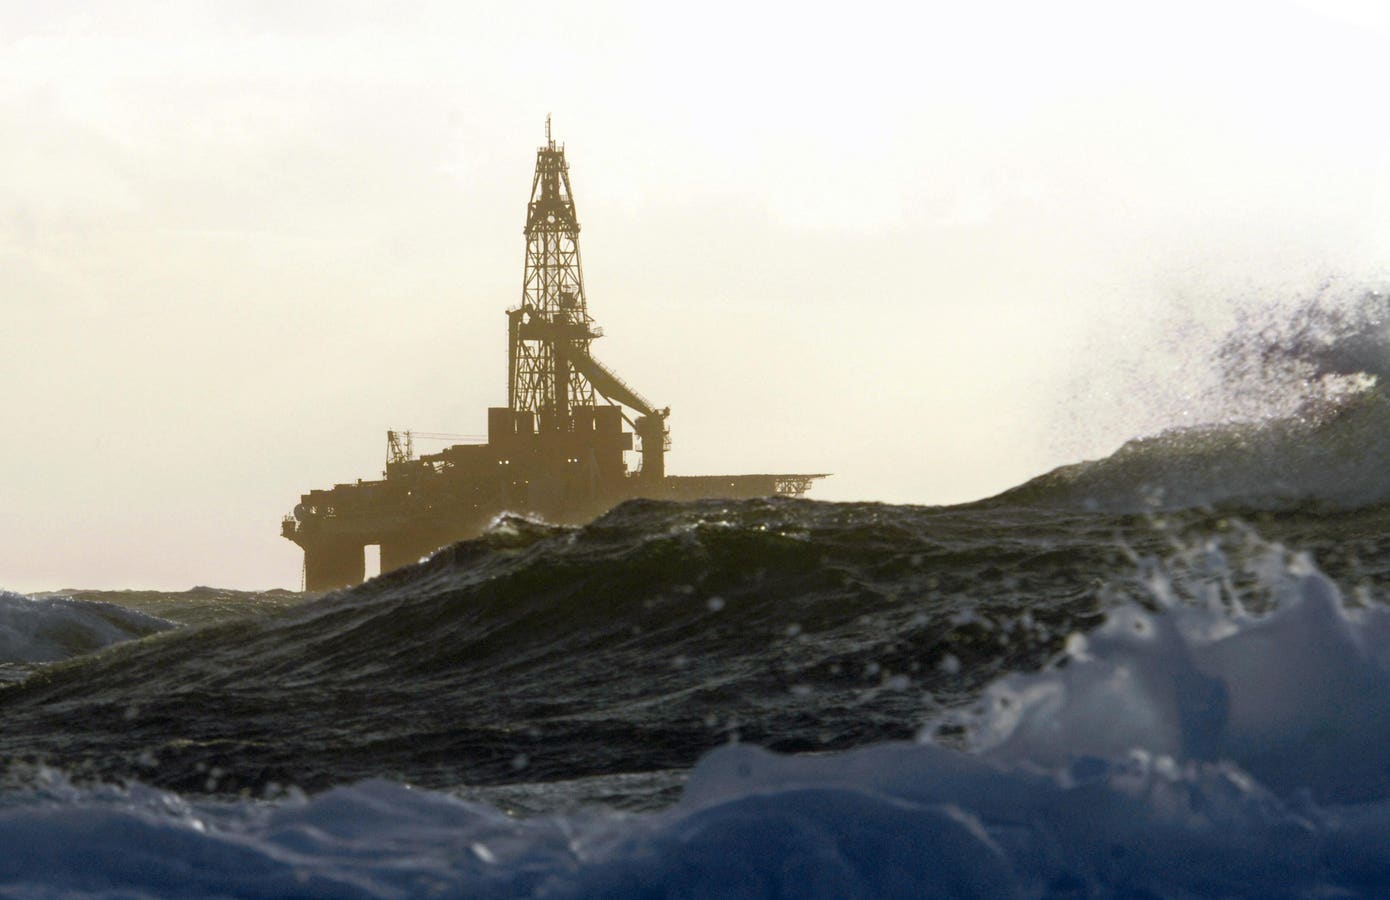 North Sea Countries Not Aligned With Climate Targets, Report Shows